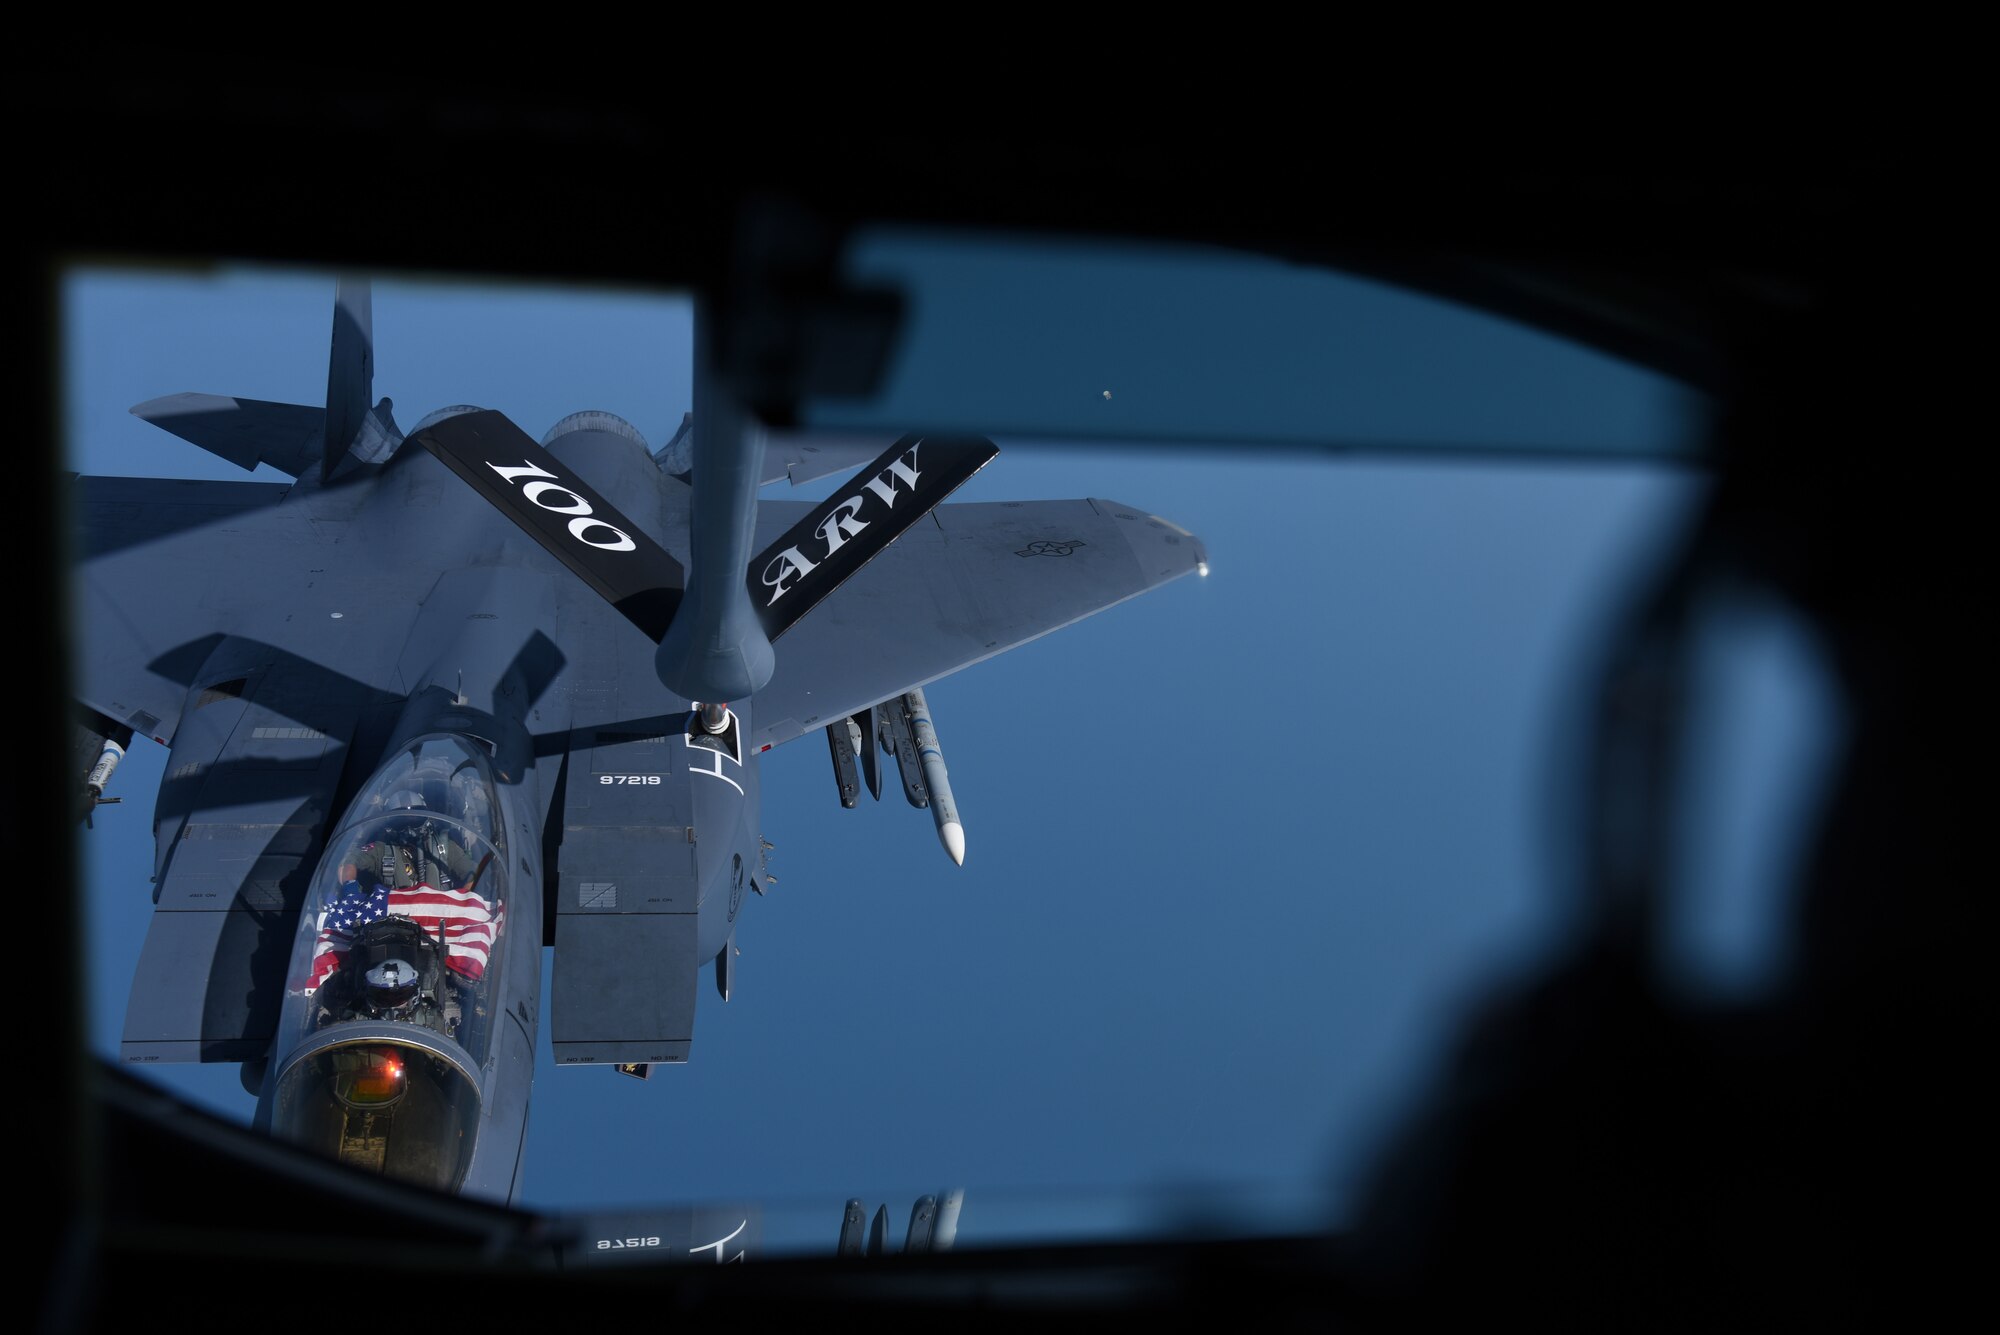 An F-15E Strike Eagle from RAF Lakenheath receives fuel from a KC-135 Stratotanker assigned to the 100th Air Refueling Wing from RAF Mildenhall over England, July 19, 2018. The F-15E was one of four to receive fuel during a routine training mission. (U.S. Air Force photo by Senior Airman Alexandra West)